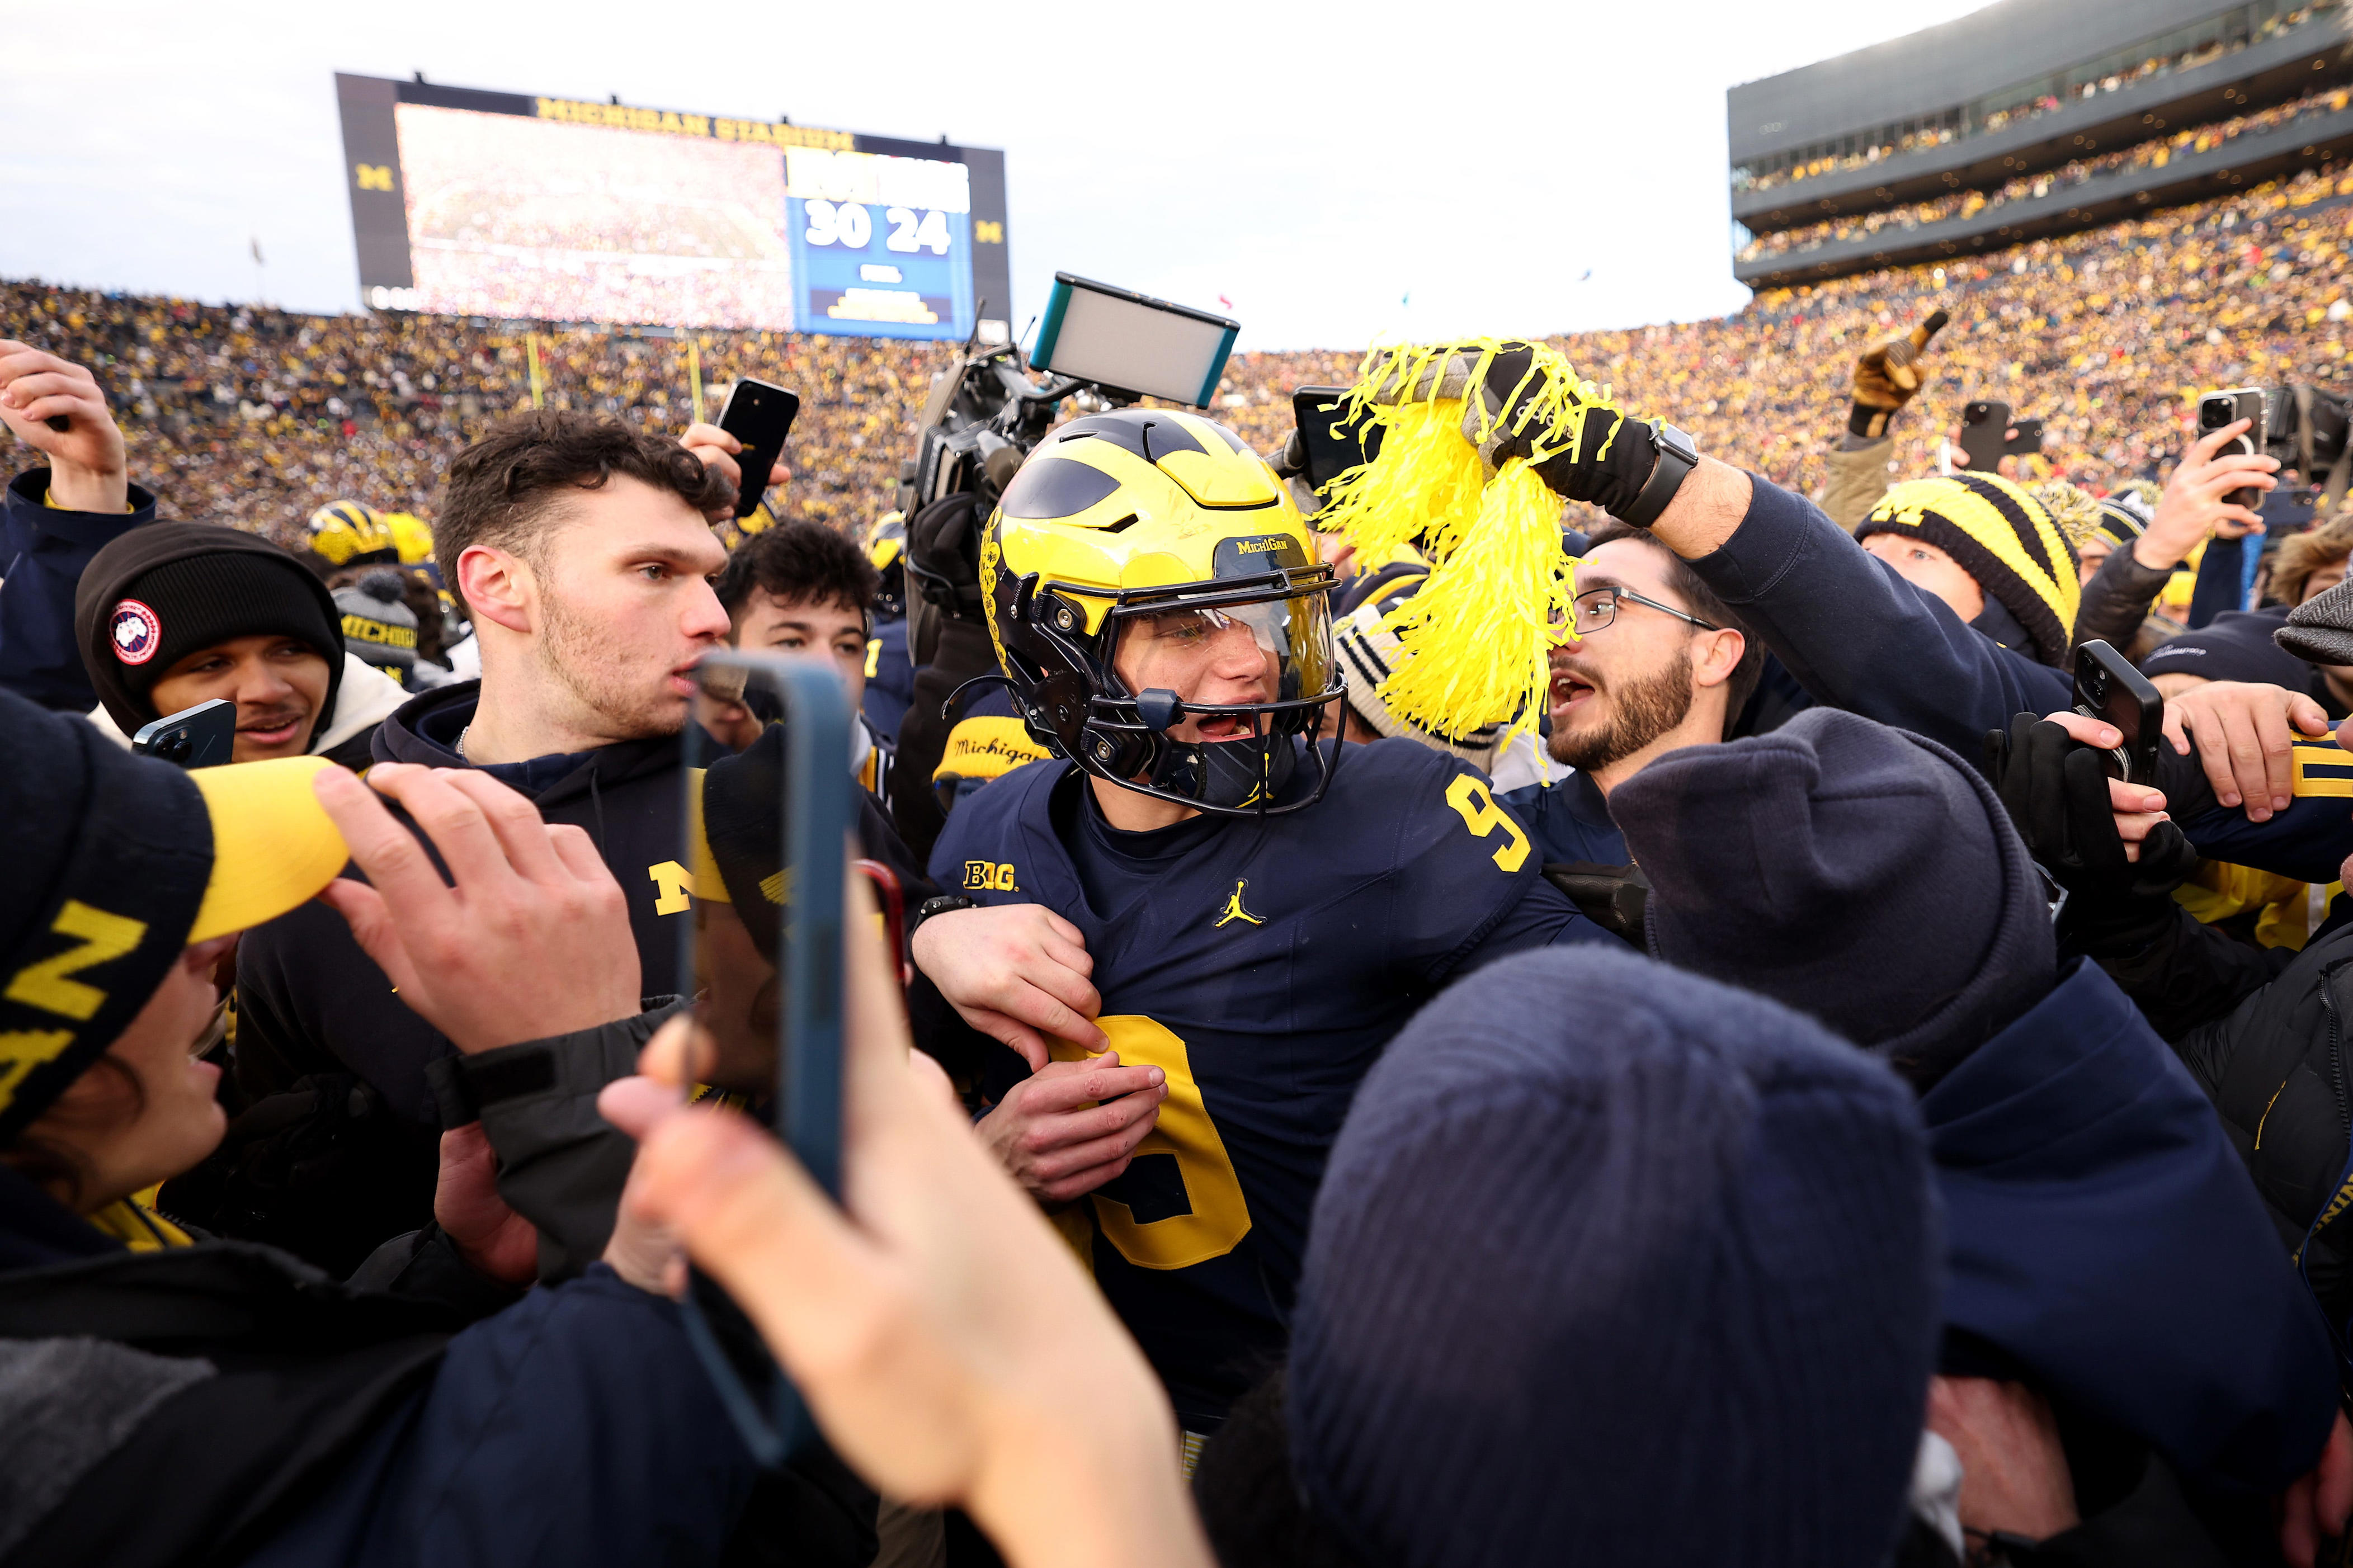 college football week 13 winners and losers: michigan again gets best of ohio state